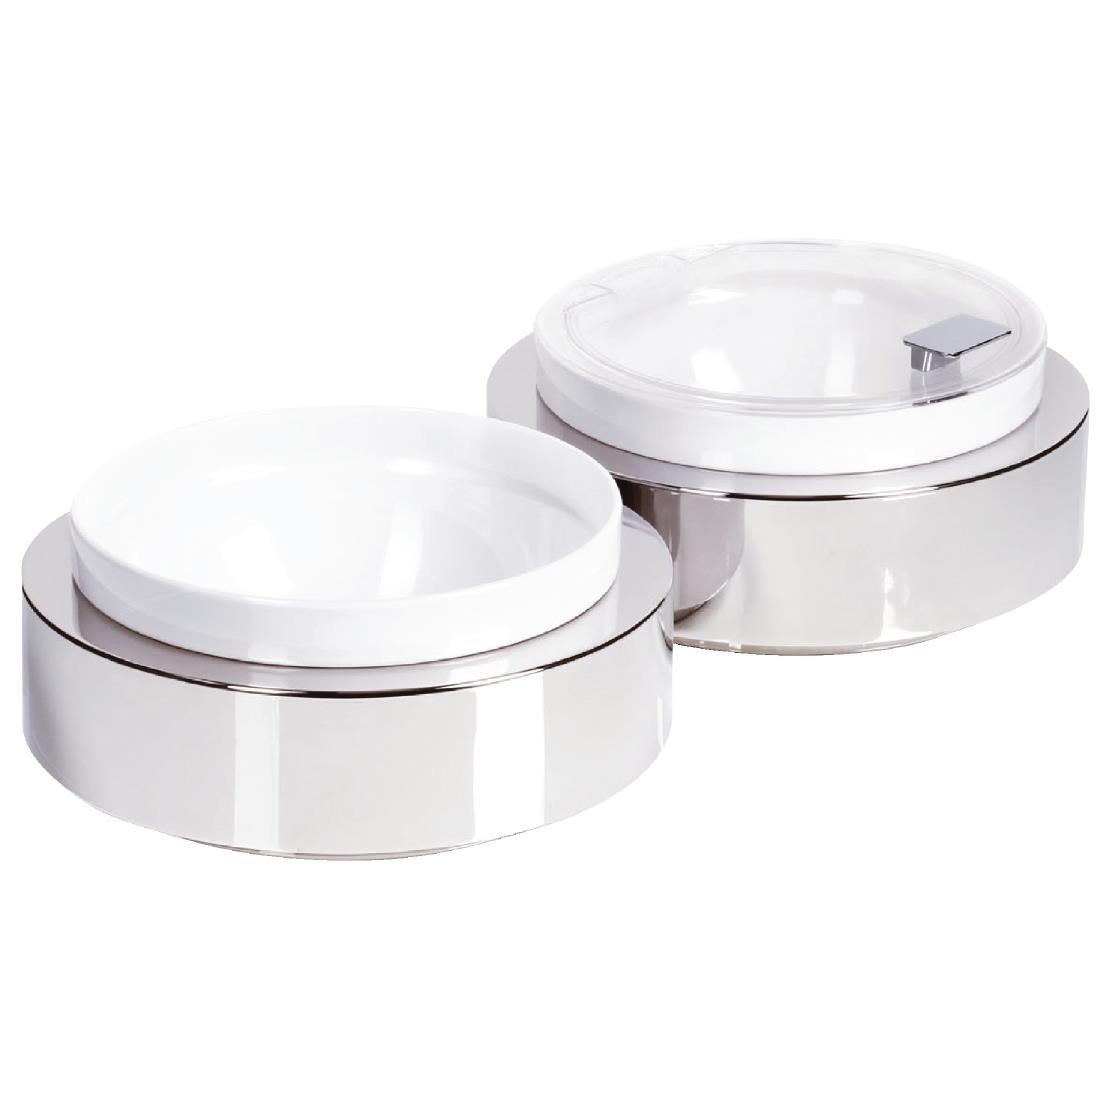 APS Frames Stainless Steel Large Round Buffet Bowl Box - GC925  - 1